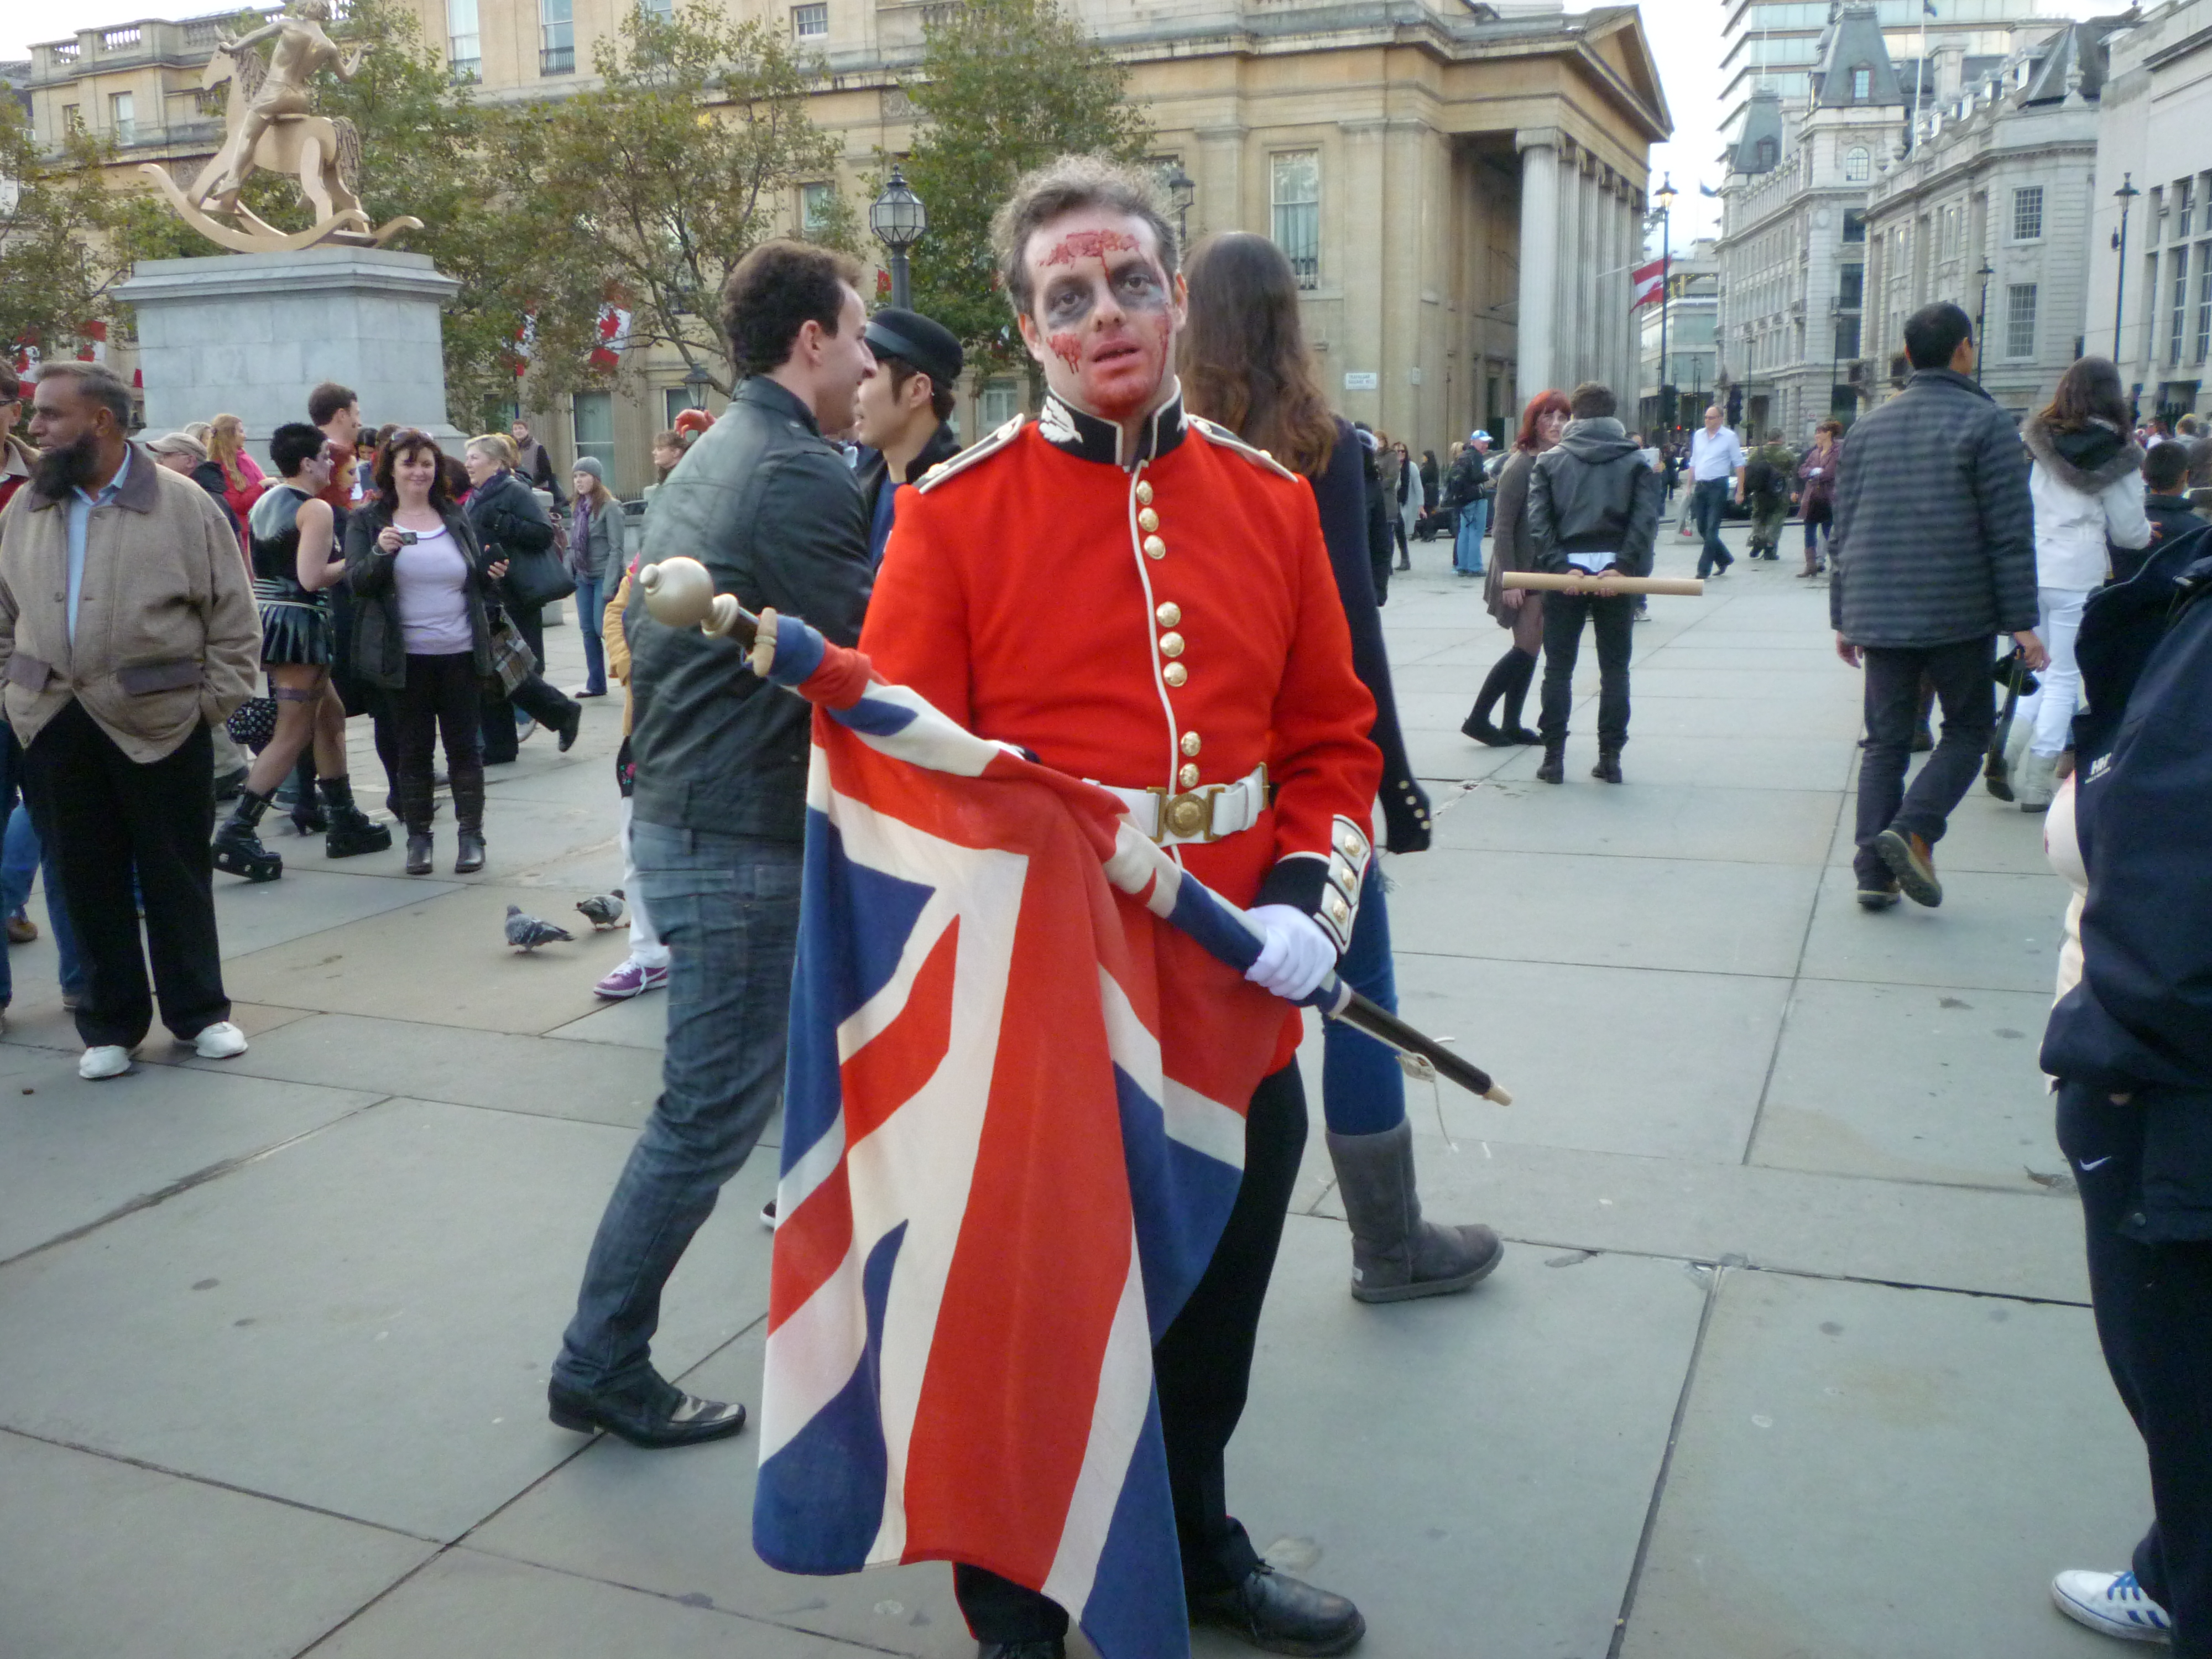 World Zombie Day in London - a figure from the past.